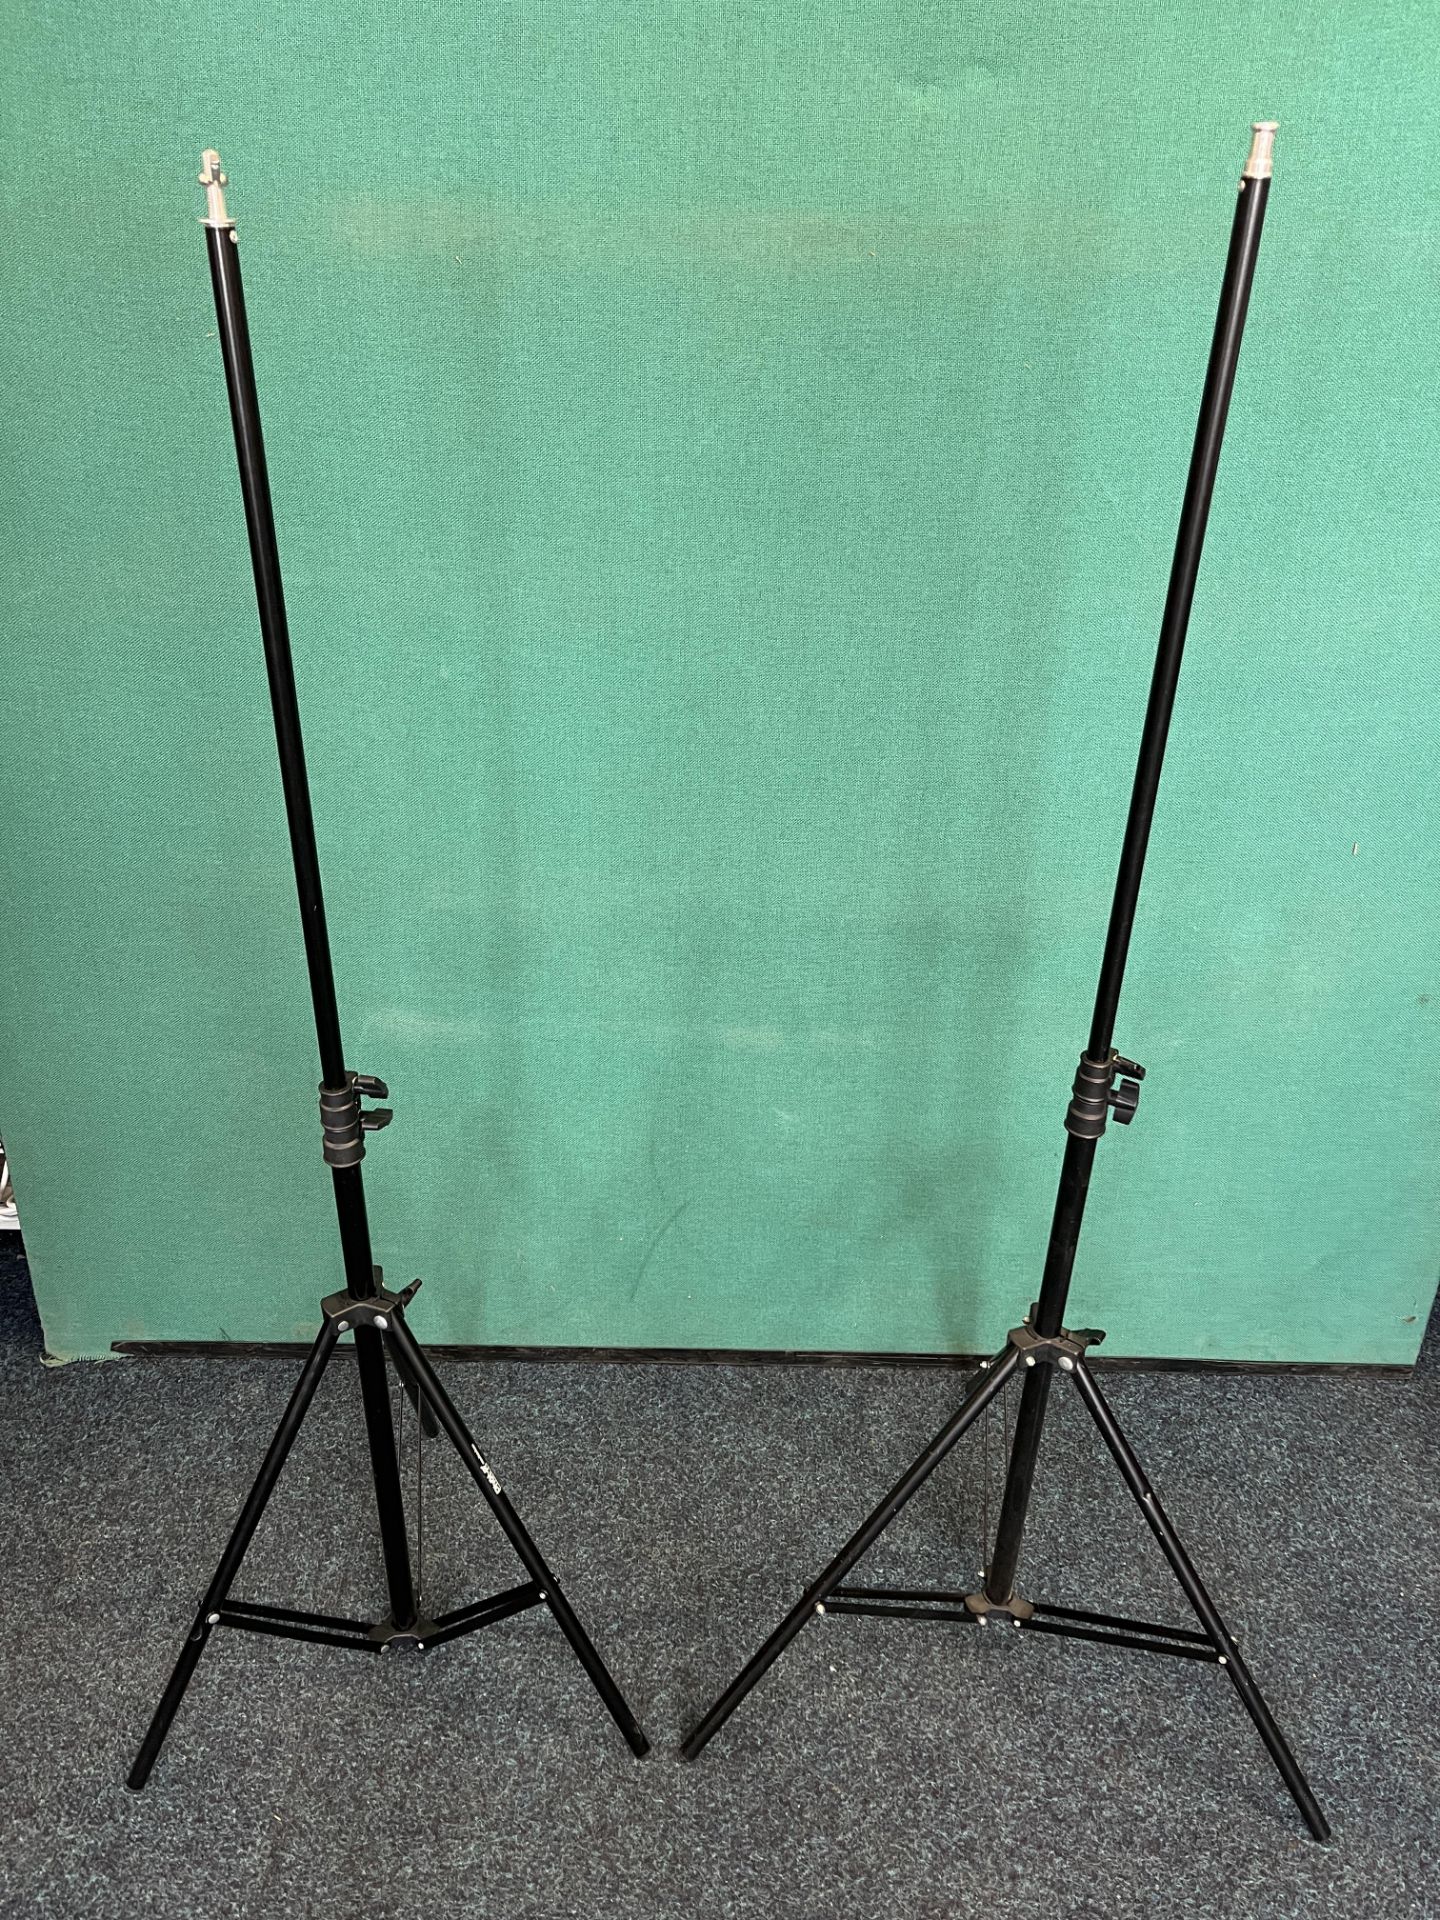 2 x Camera Tripods - As pictured - Image 2 of 6